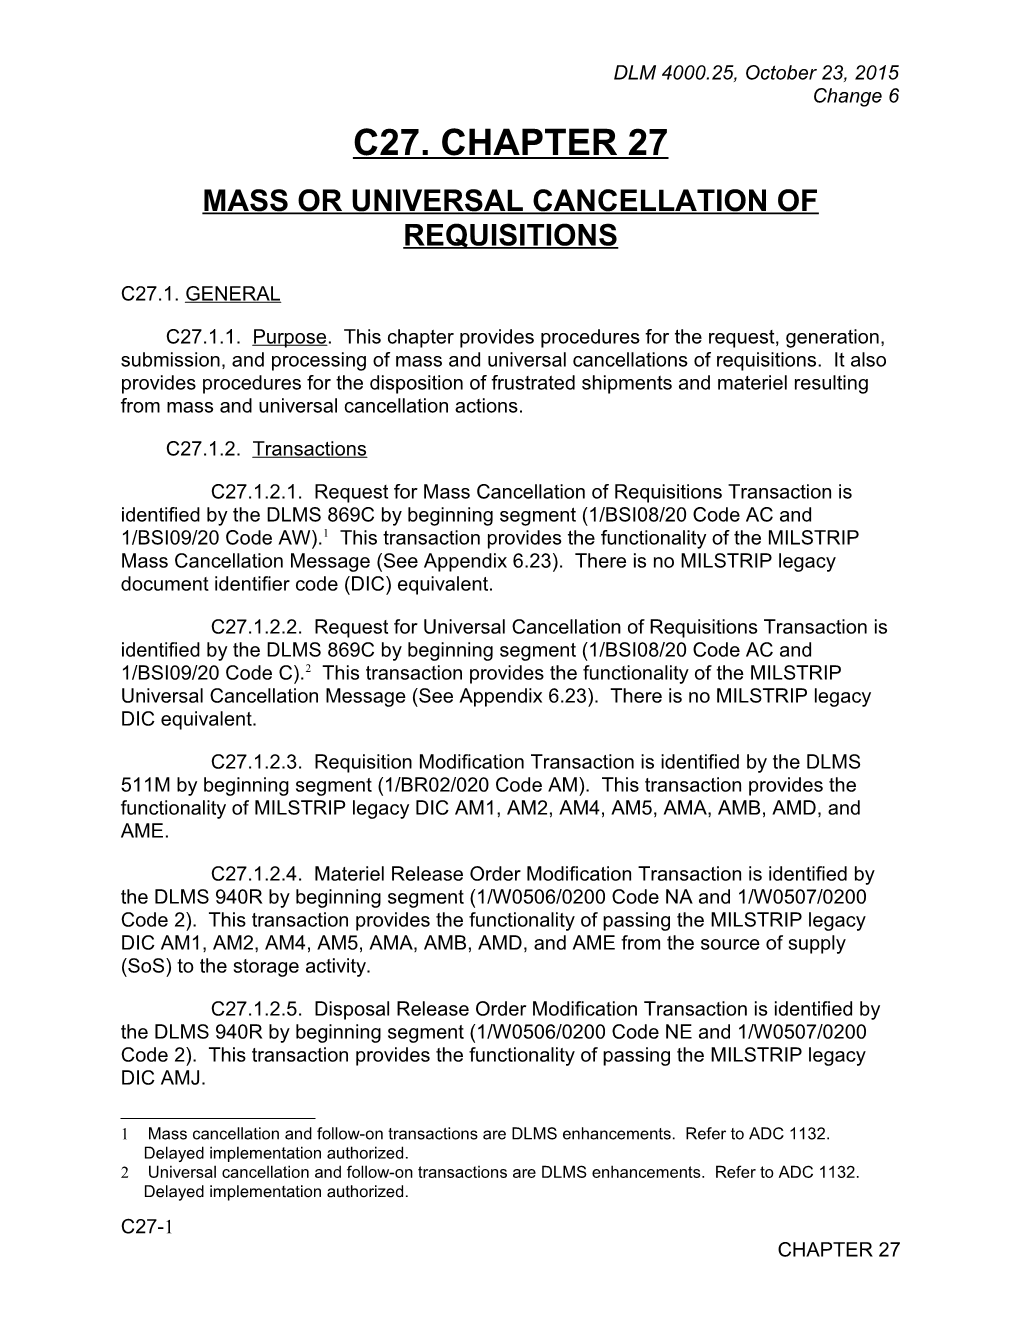 Chapter 27 - Mass Or Universal Cancellation of Requisitions